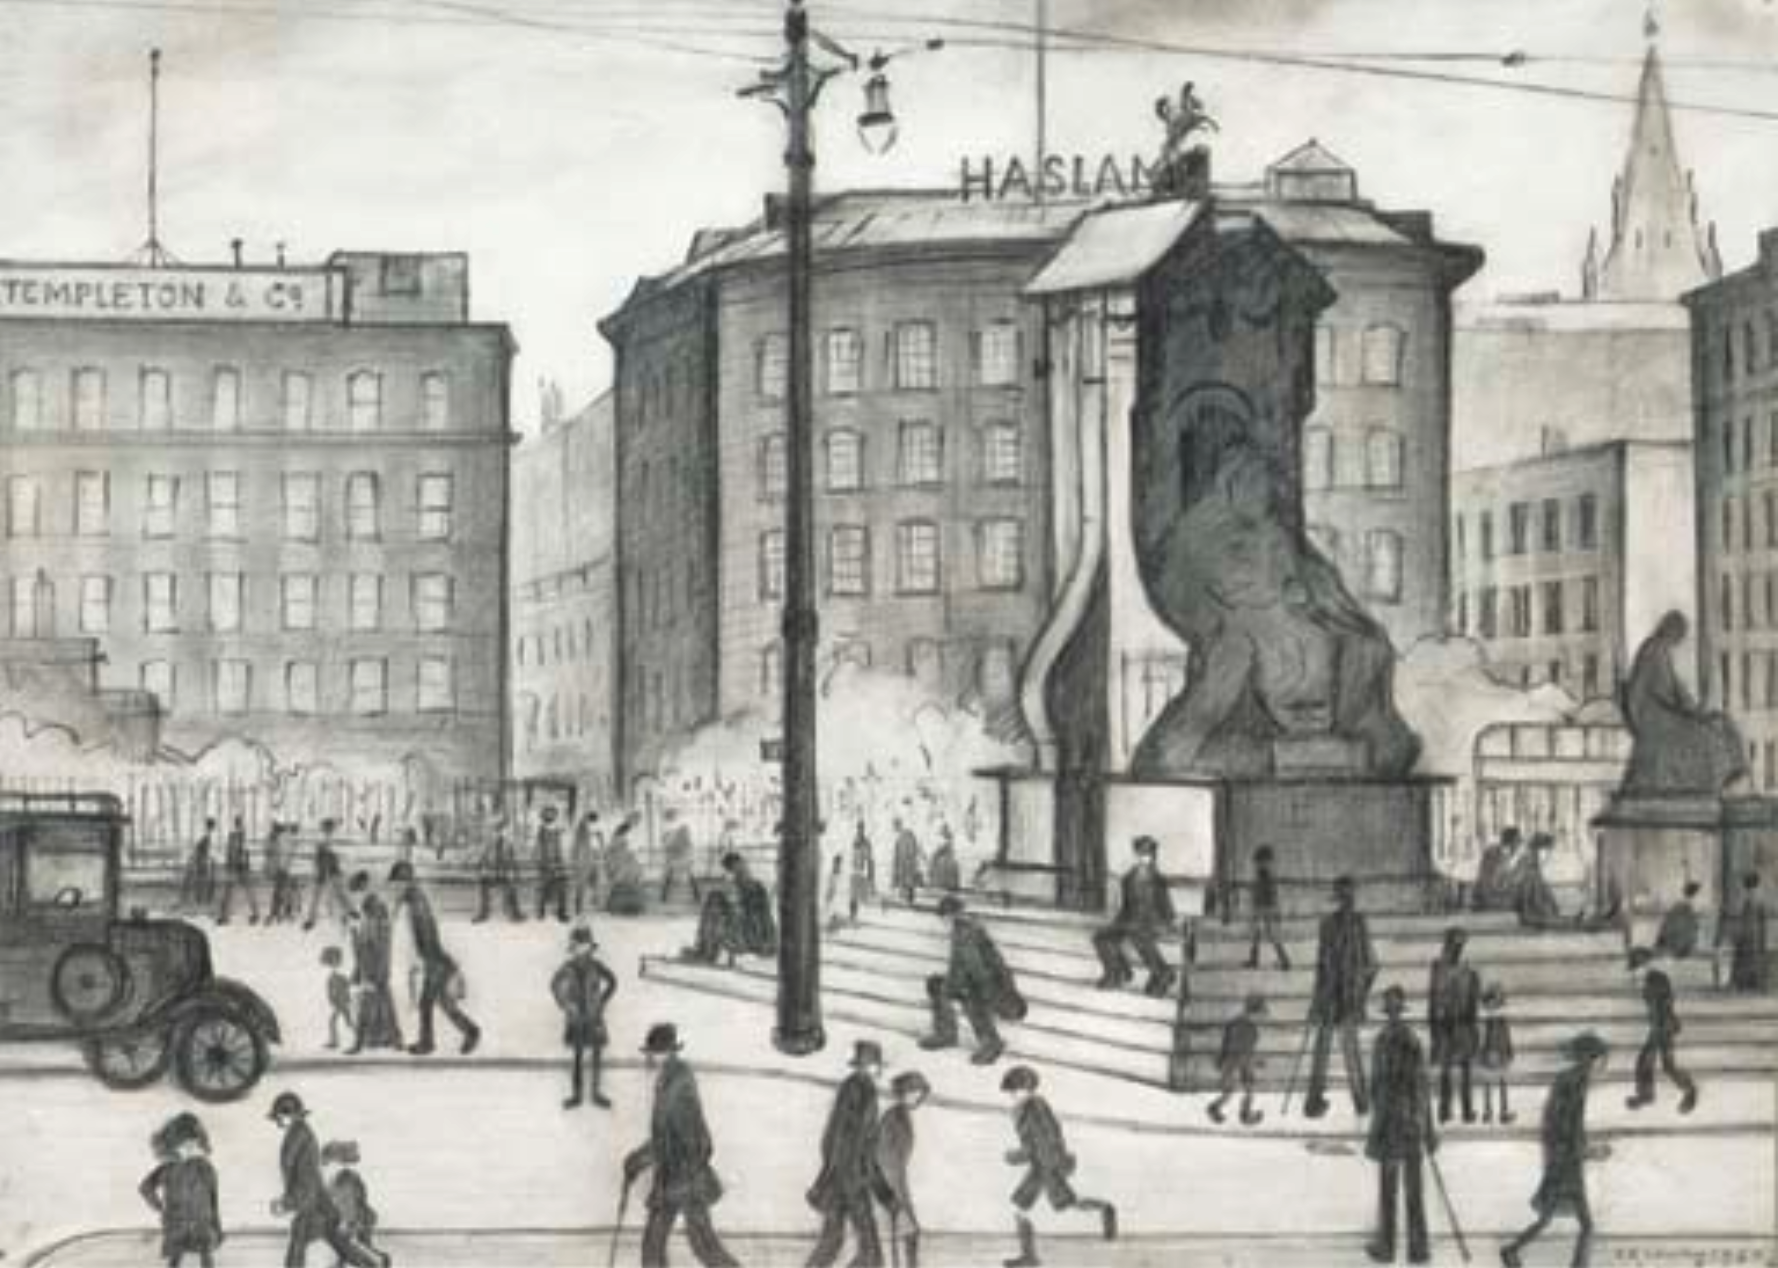 Piccadilly, Manchester (1930) by Laurence Stephen Lowry (1887 - 1976), English artist.